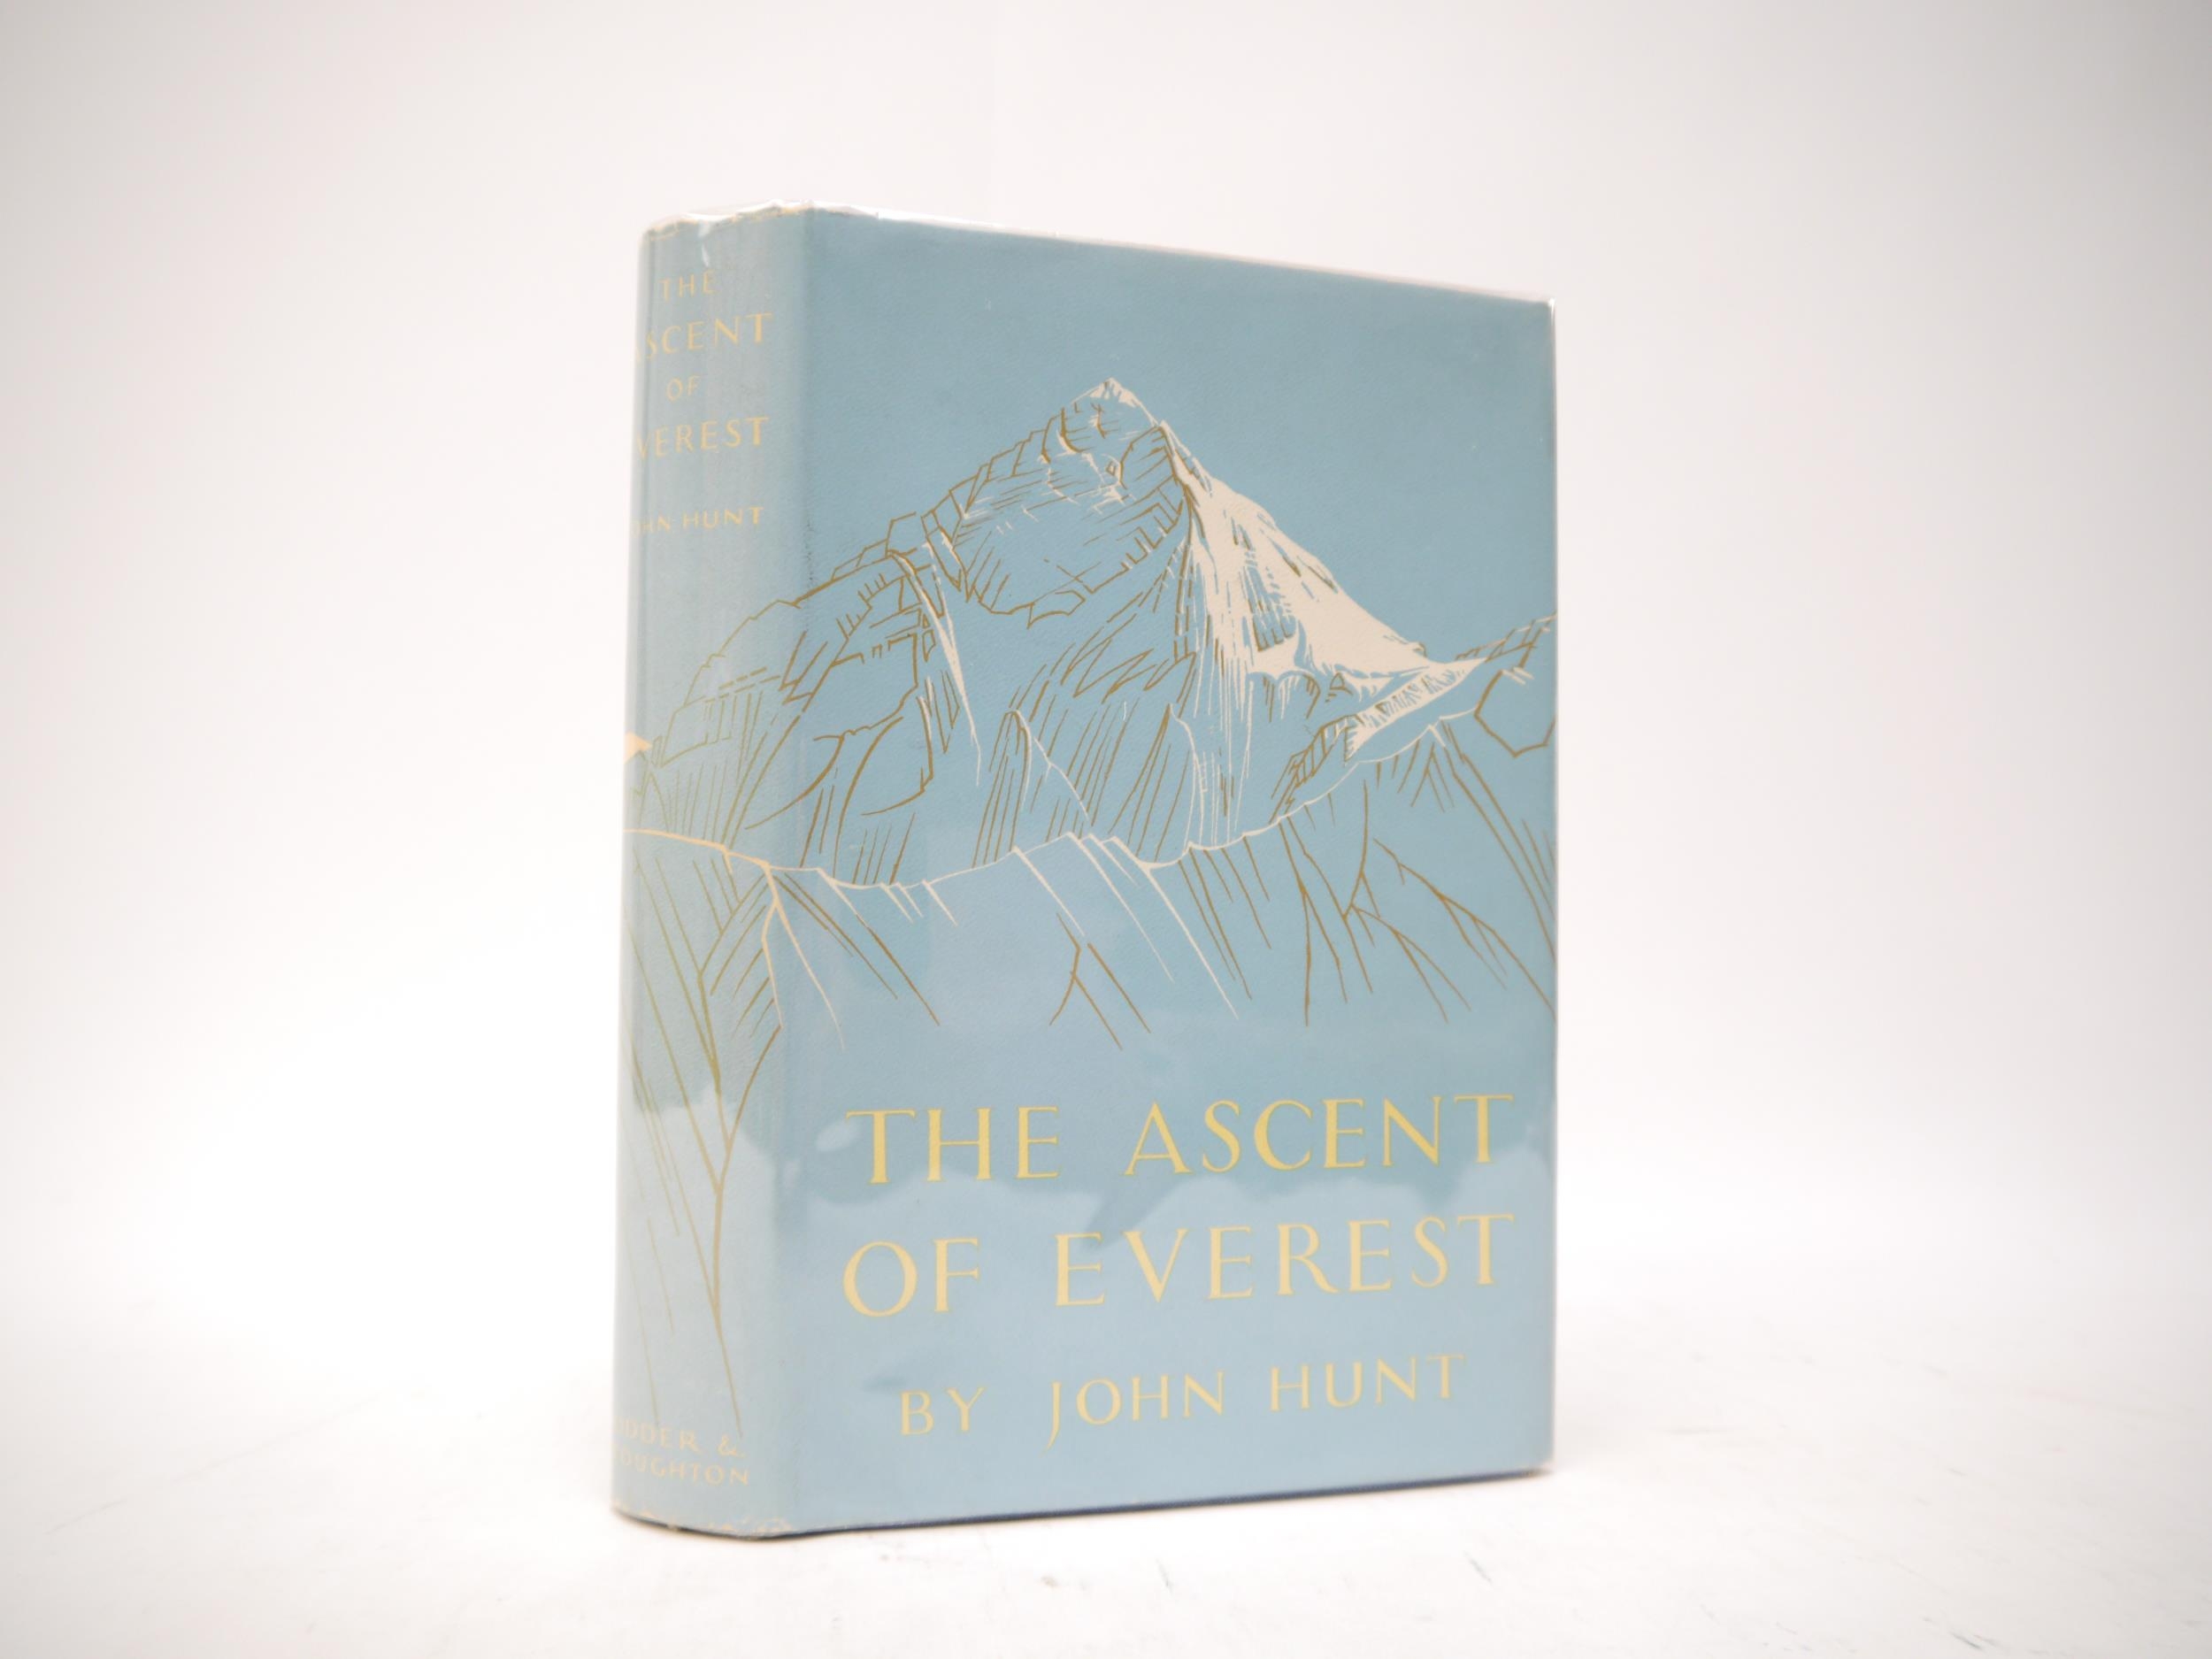 John Hunt: 'The Ascent of Everest', London, Hodder & Stoughton, 1953, 1st edition, signed by the - Image 3 of 4